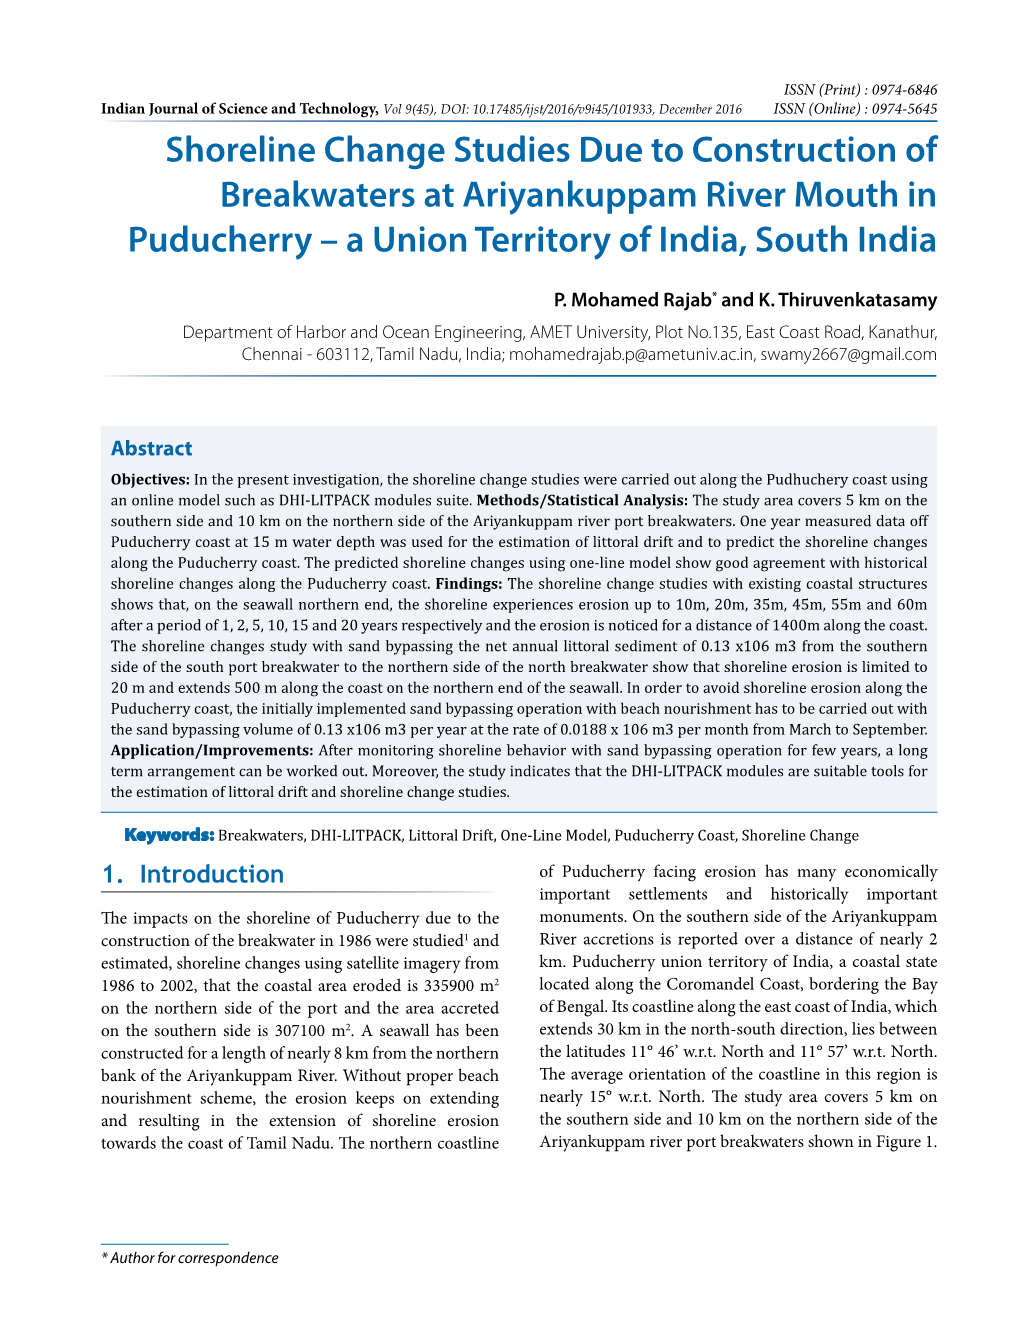 Shoreline Change Studies Due to Construction of Breakwaters at Ariyankuppam River Mouth in Puducherry – a Union Territory of India, South India